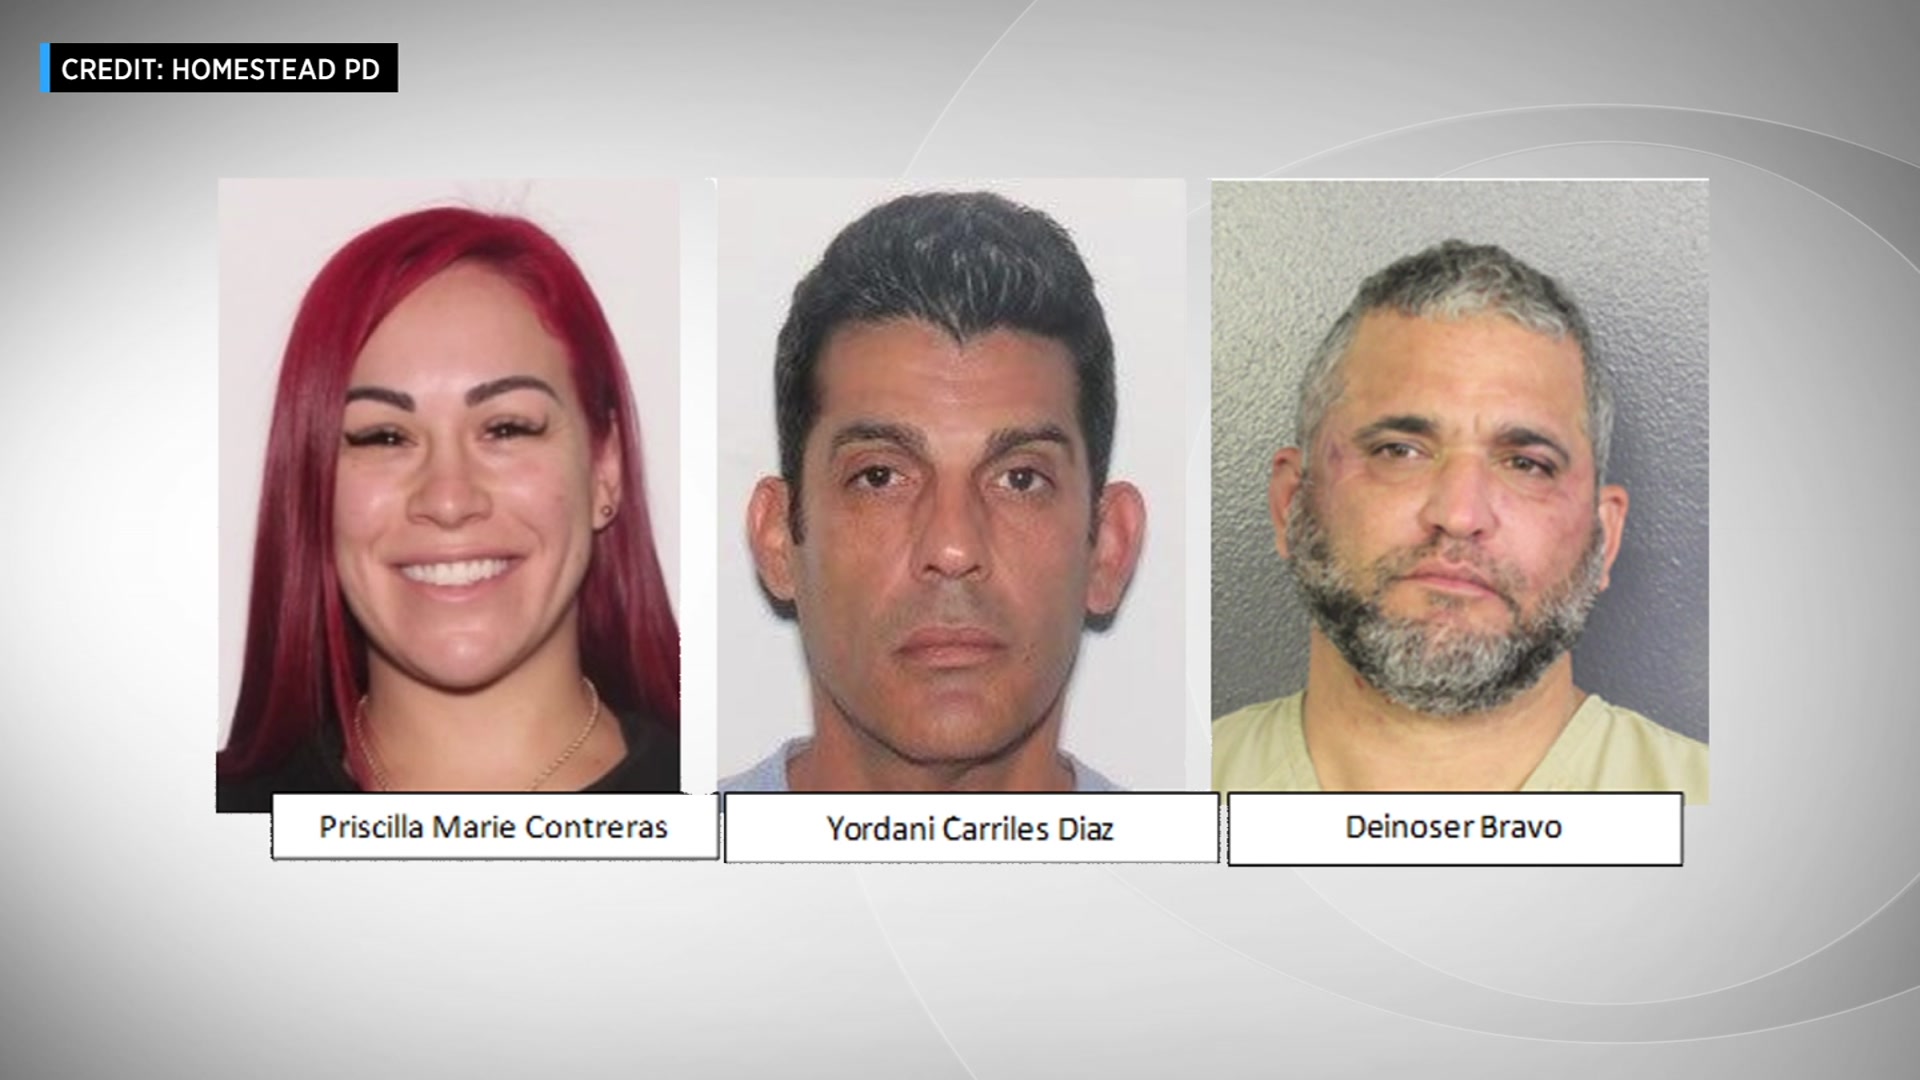 Last Remaining Suspect Arrested In South Florida Real State Scam Affecting Dozens; 2 In Custody